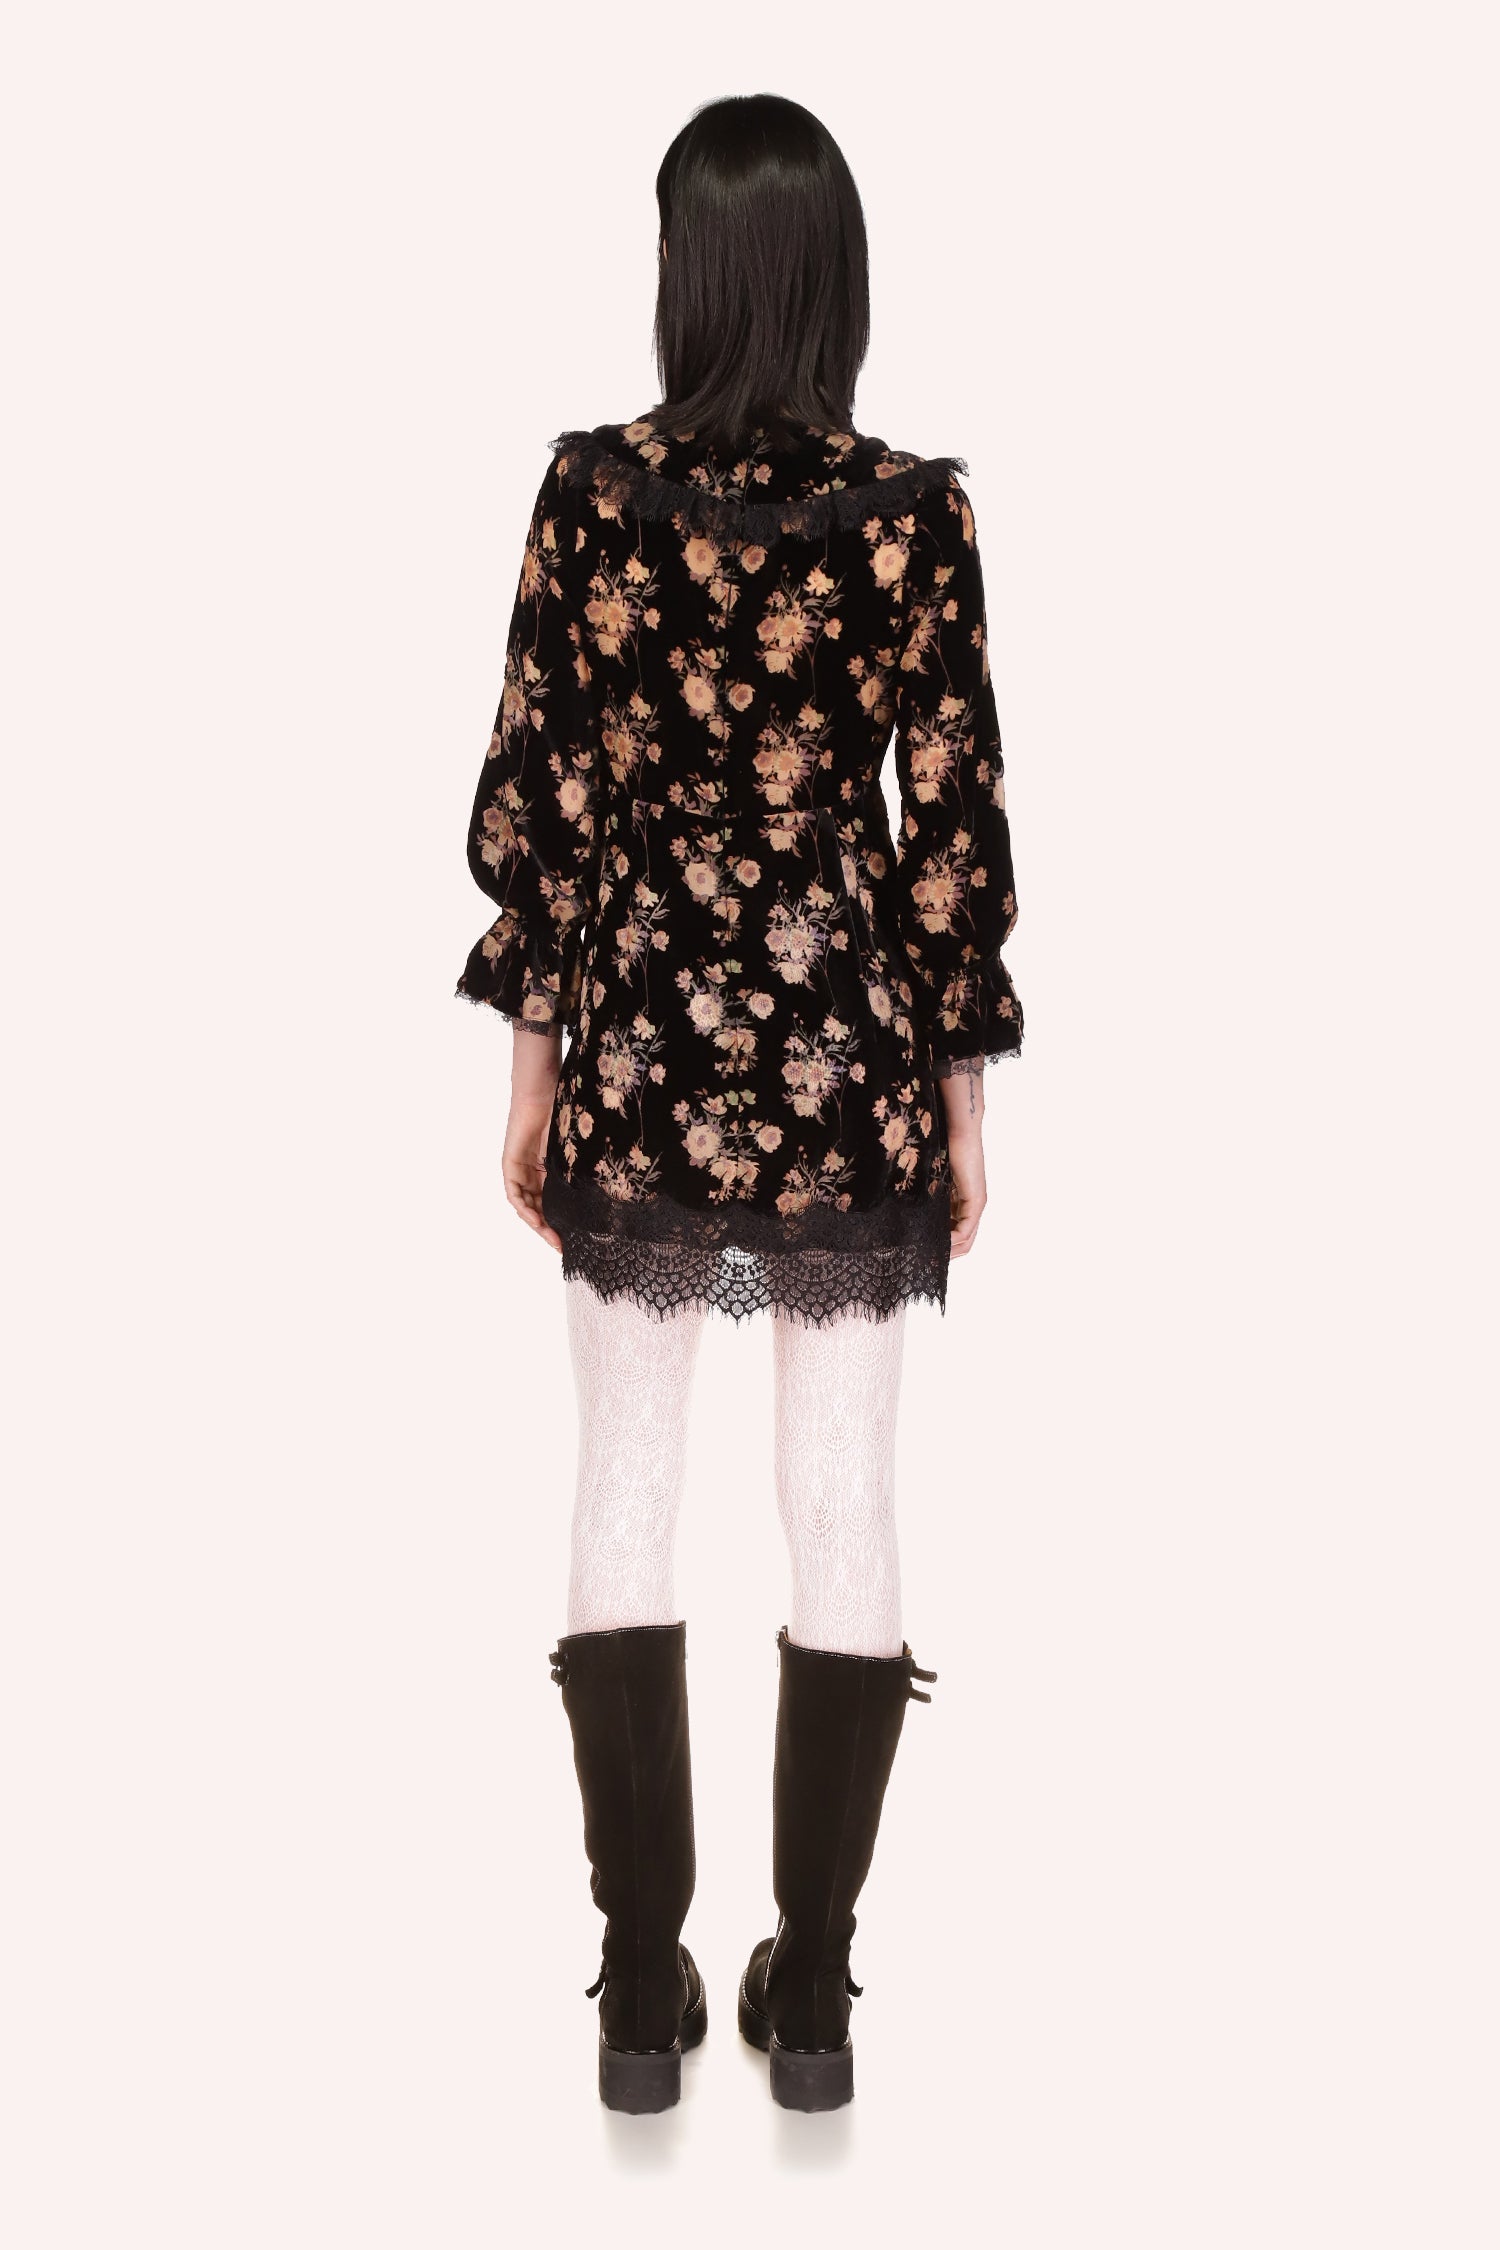 Black dress with beige floral bouquet pattern, V-shaped collar, long sleeves, and black lace at collar and hem